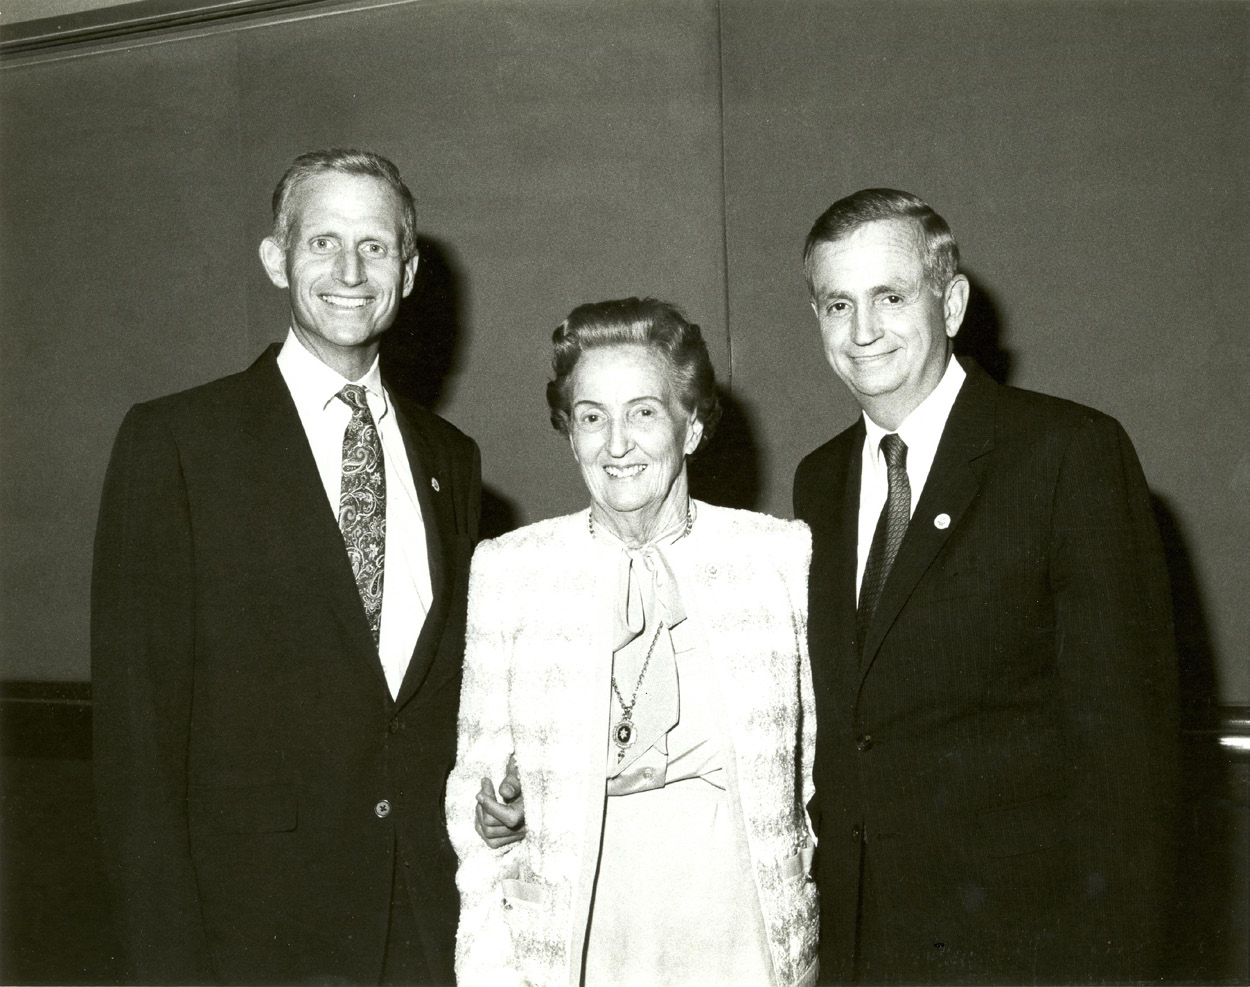 Dick, Allie, and Bill at the annual meeting following J.W.’s death, 1986.